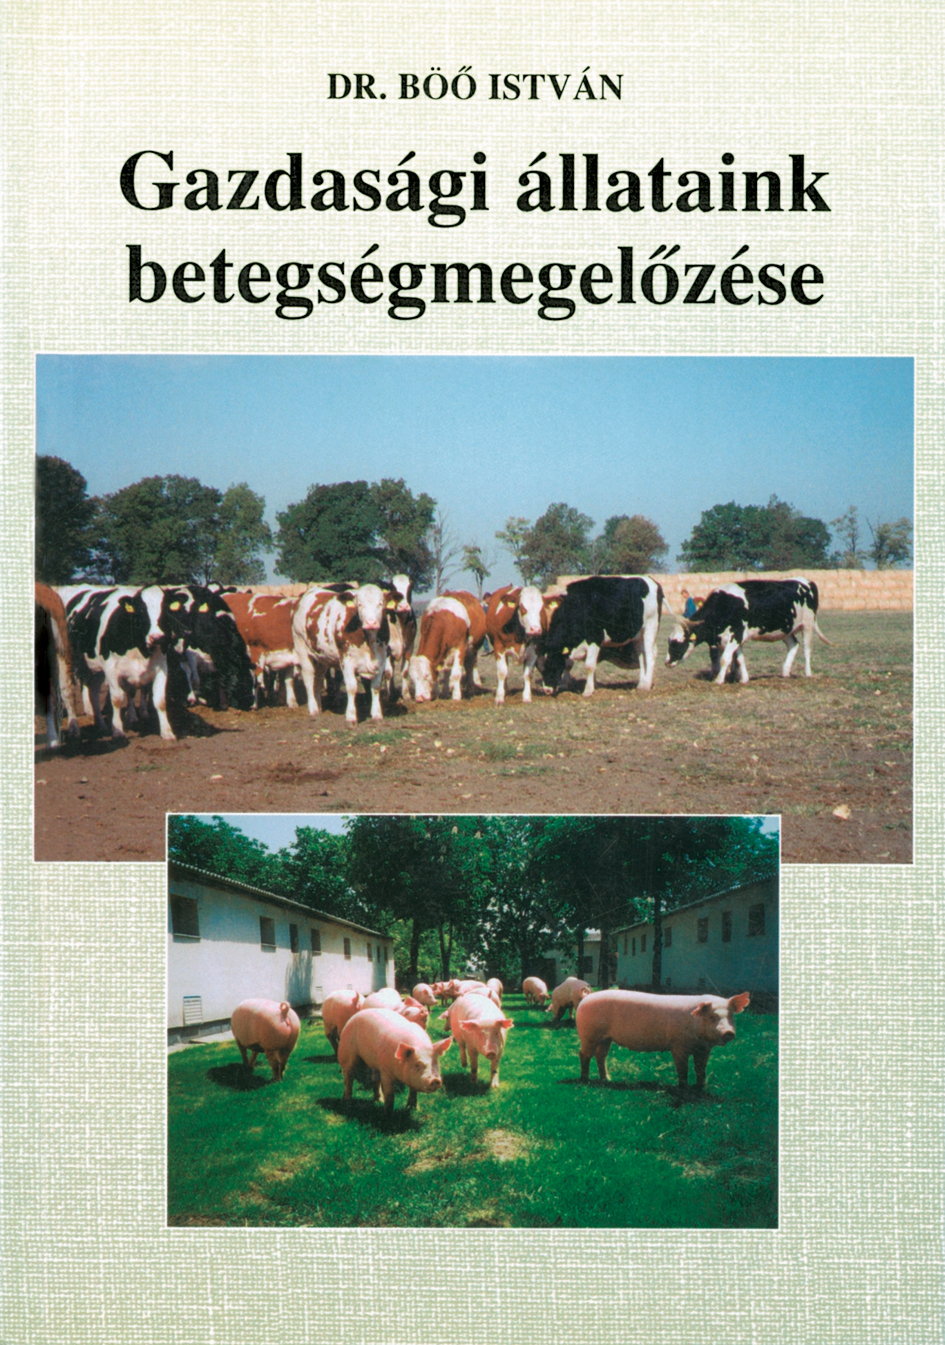 Disease prevention in our farm animals